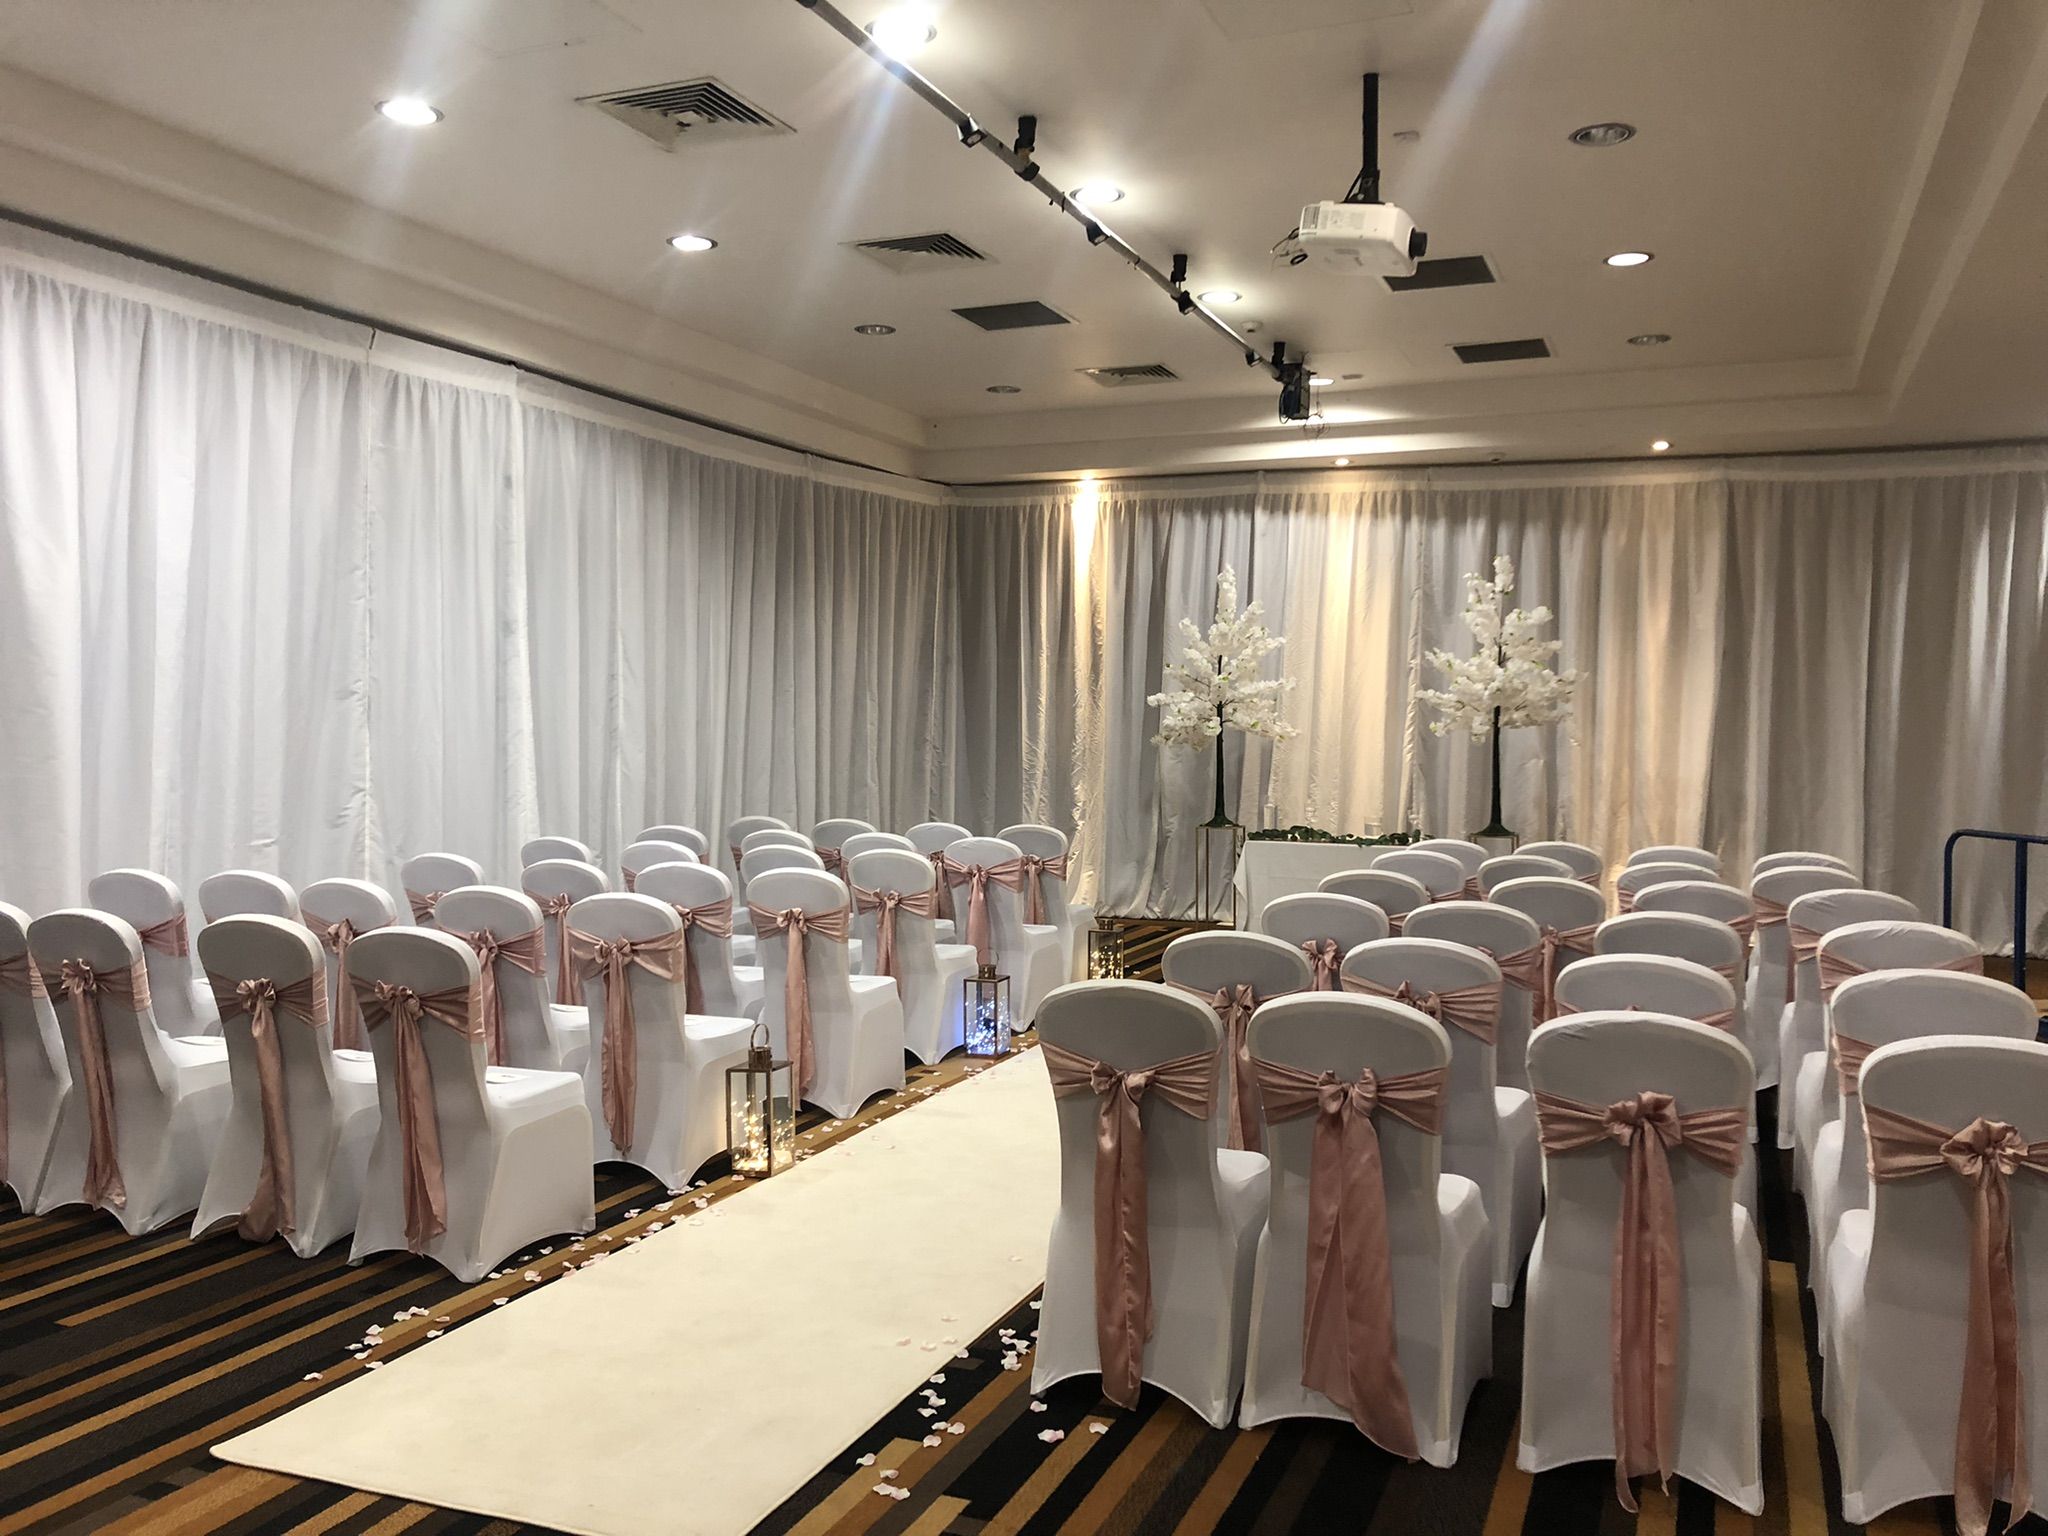 rows of white chairs with pink sashes and bows.